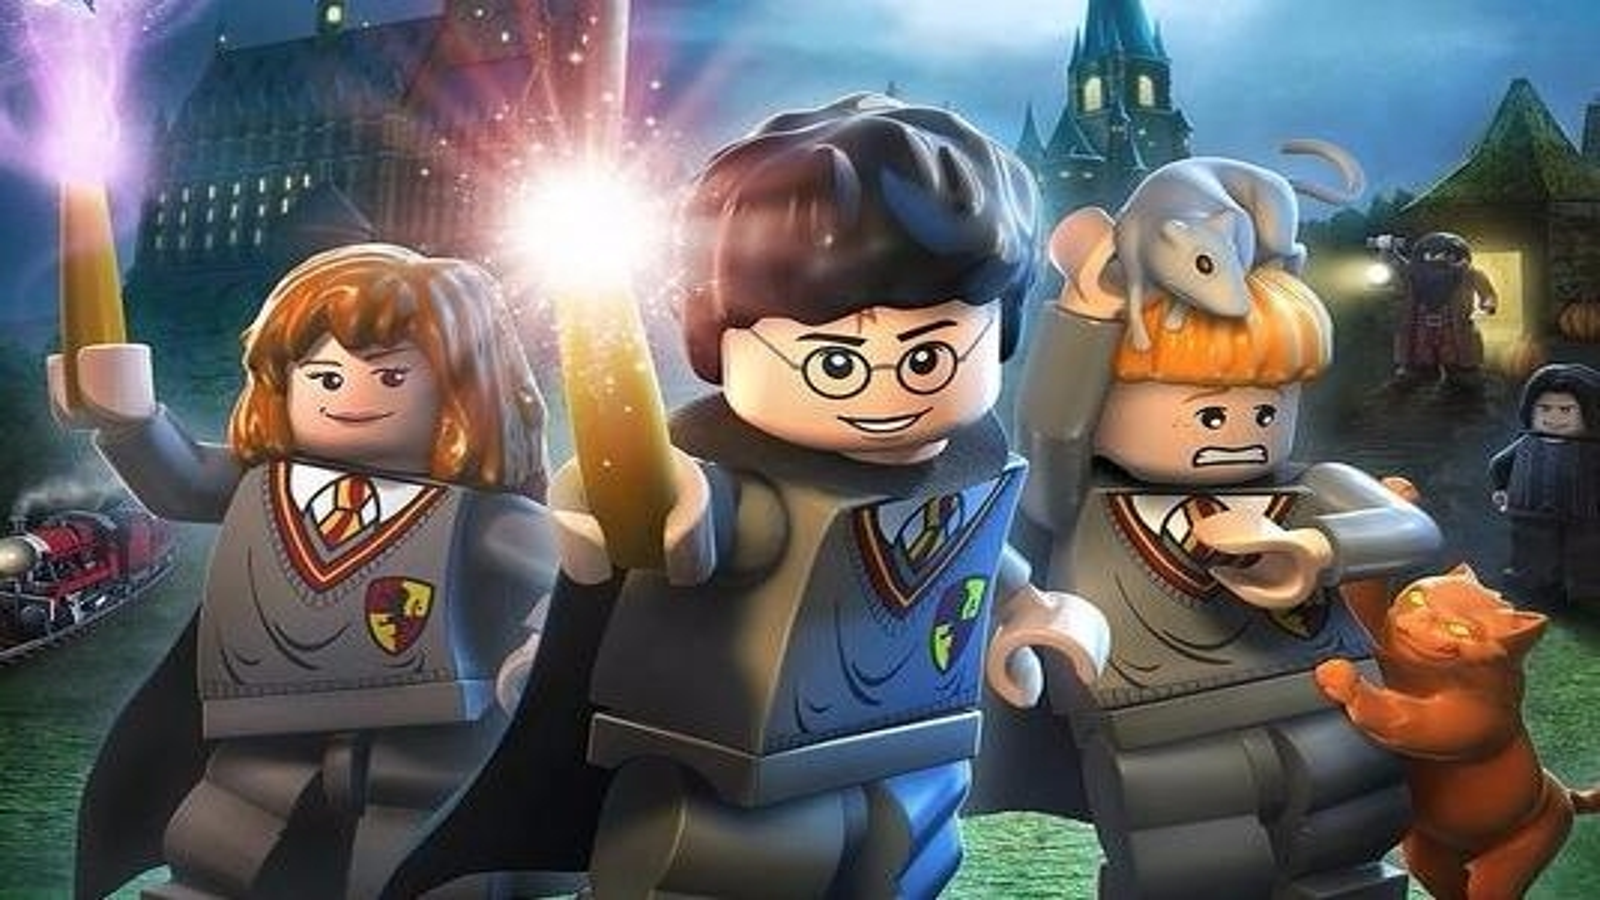 LEGO Harry Potter cheats - codes list for Years 1-4, Years 5-7 on PS4, Switch, Xbox One, PS3, 360, Wii, PC | Eurogamer.net